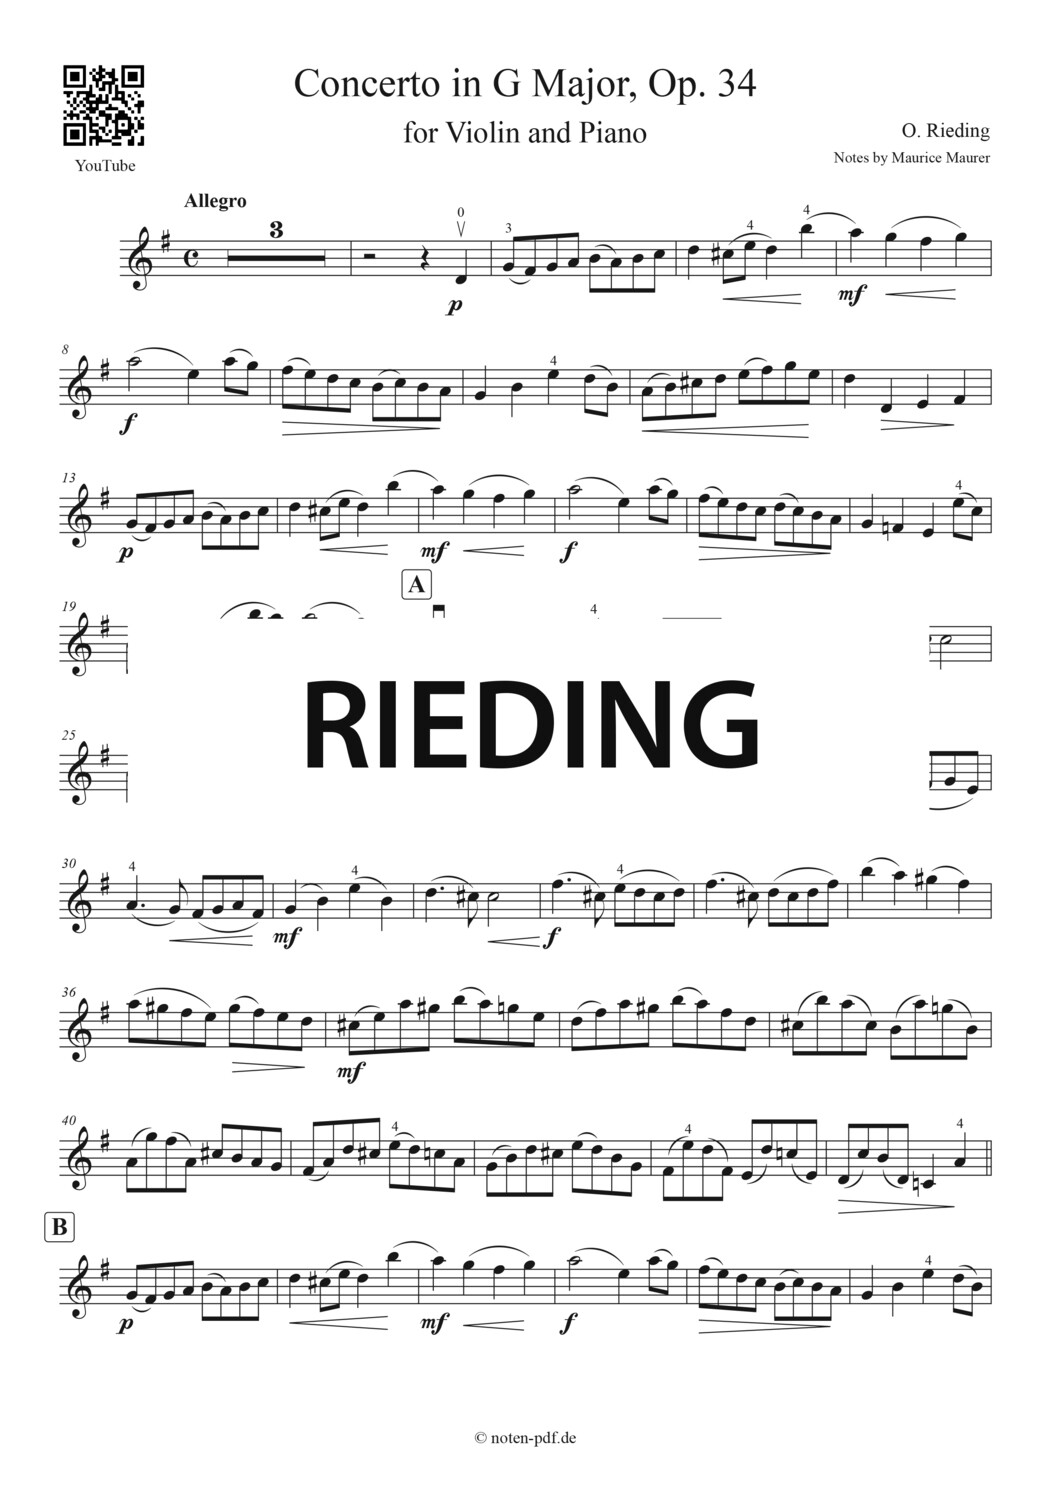 Rieding: Concerto in G Major Op. 34, 3. Movement